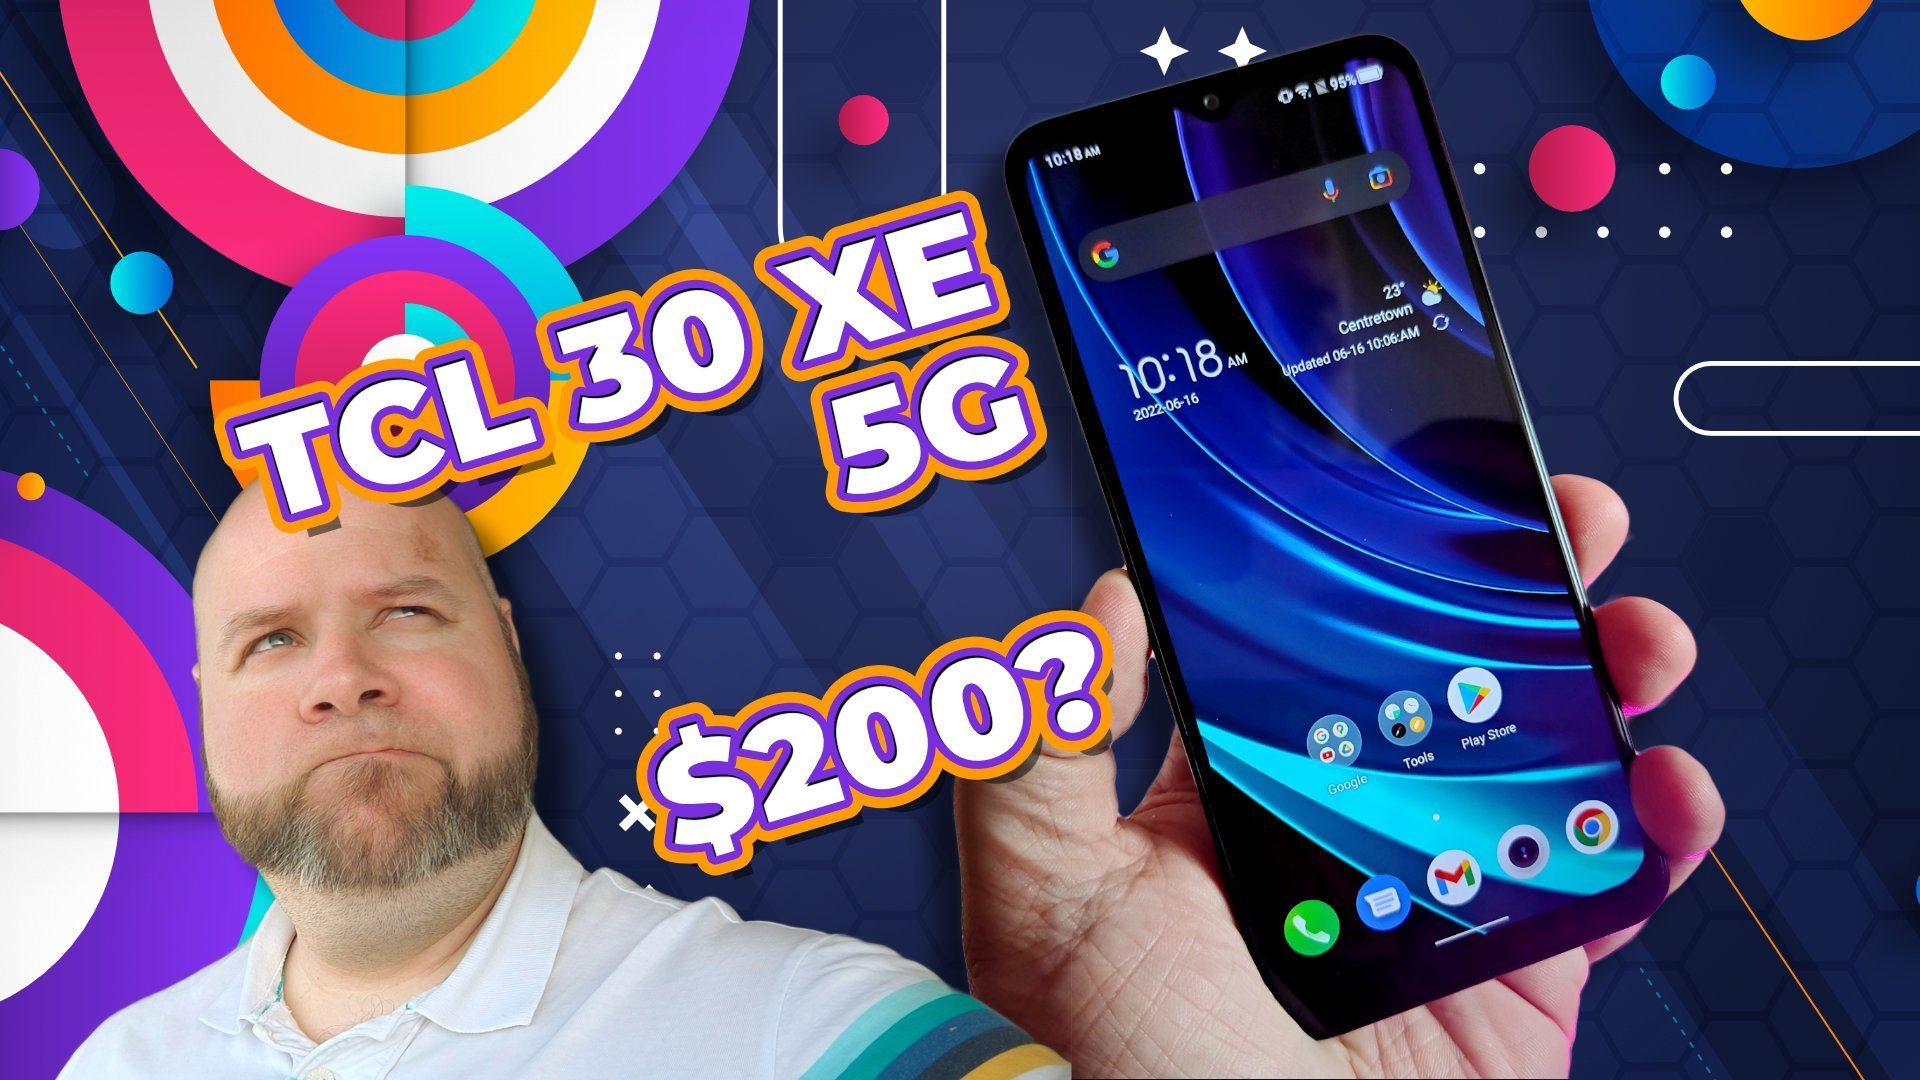 $200 Budget Smartphone? Tcl 30 Xe 5G - I'M Impressed - Review